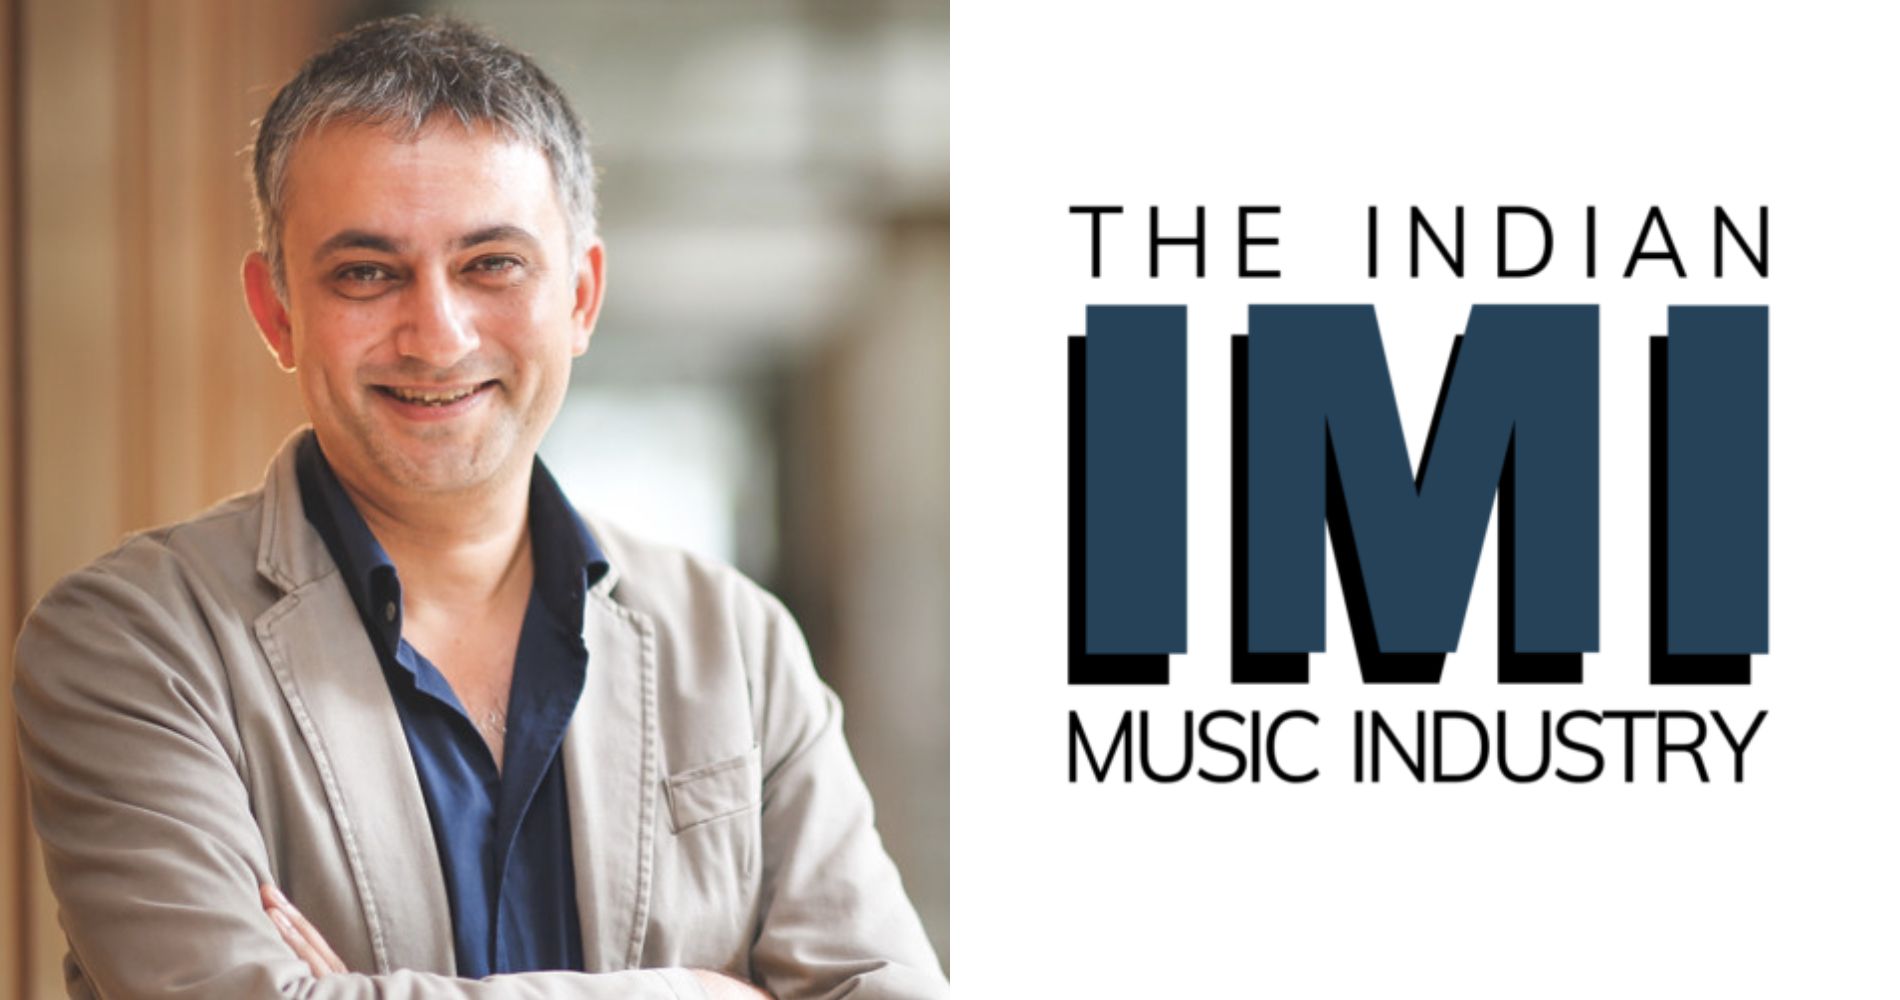 Overview of Indian Music Industry 2022 by Vikram Mehra